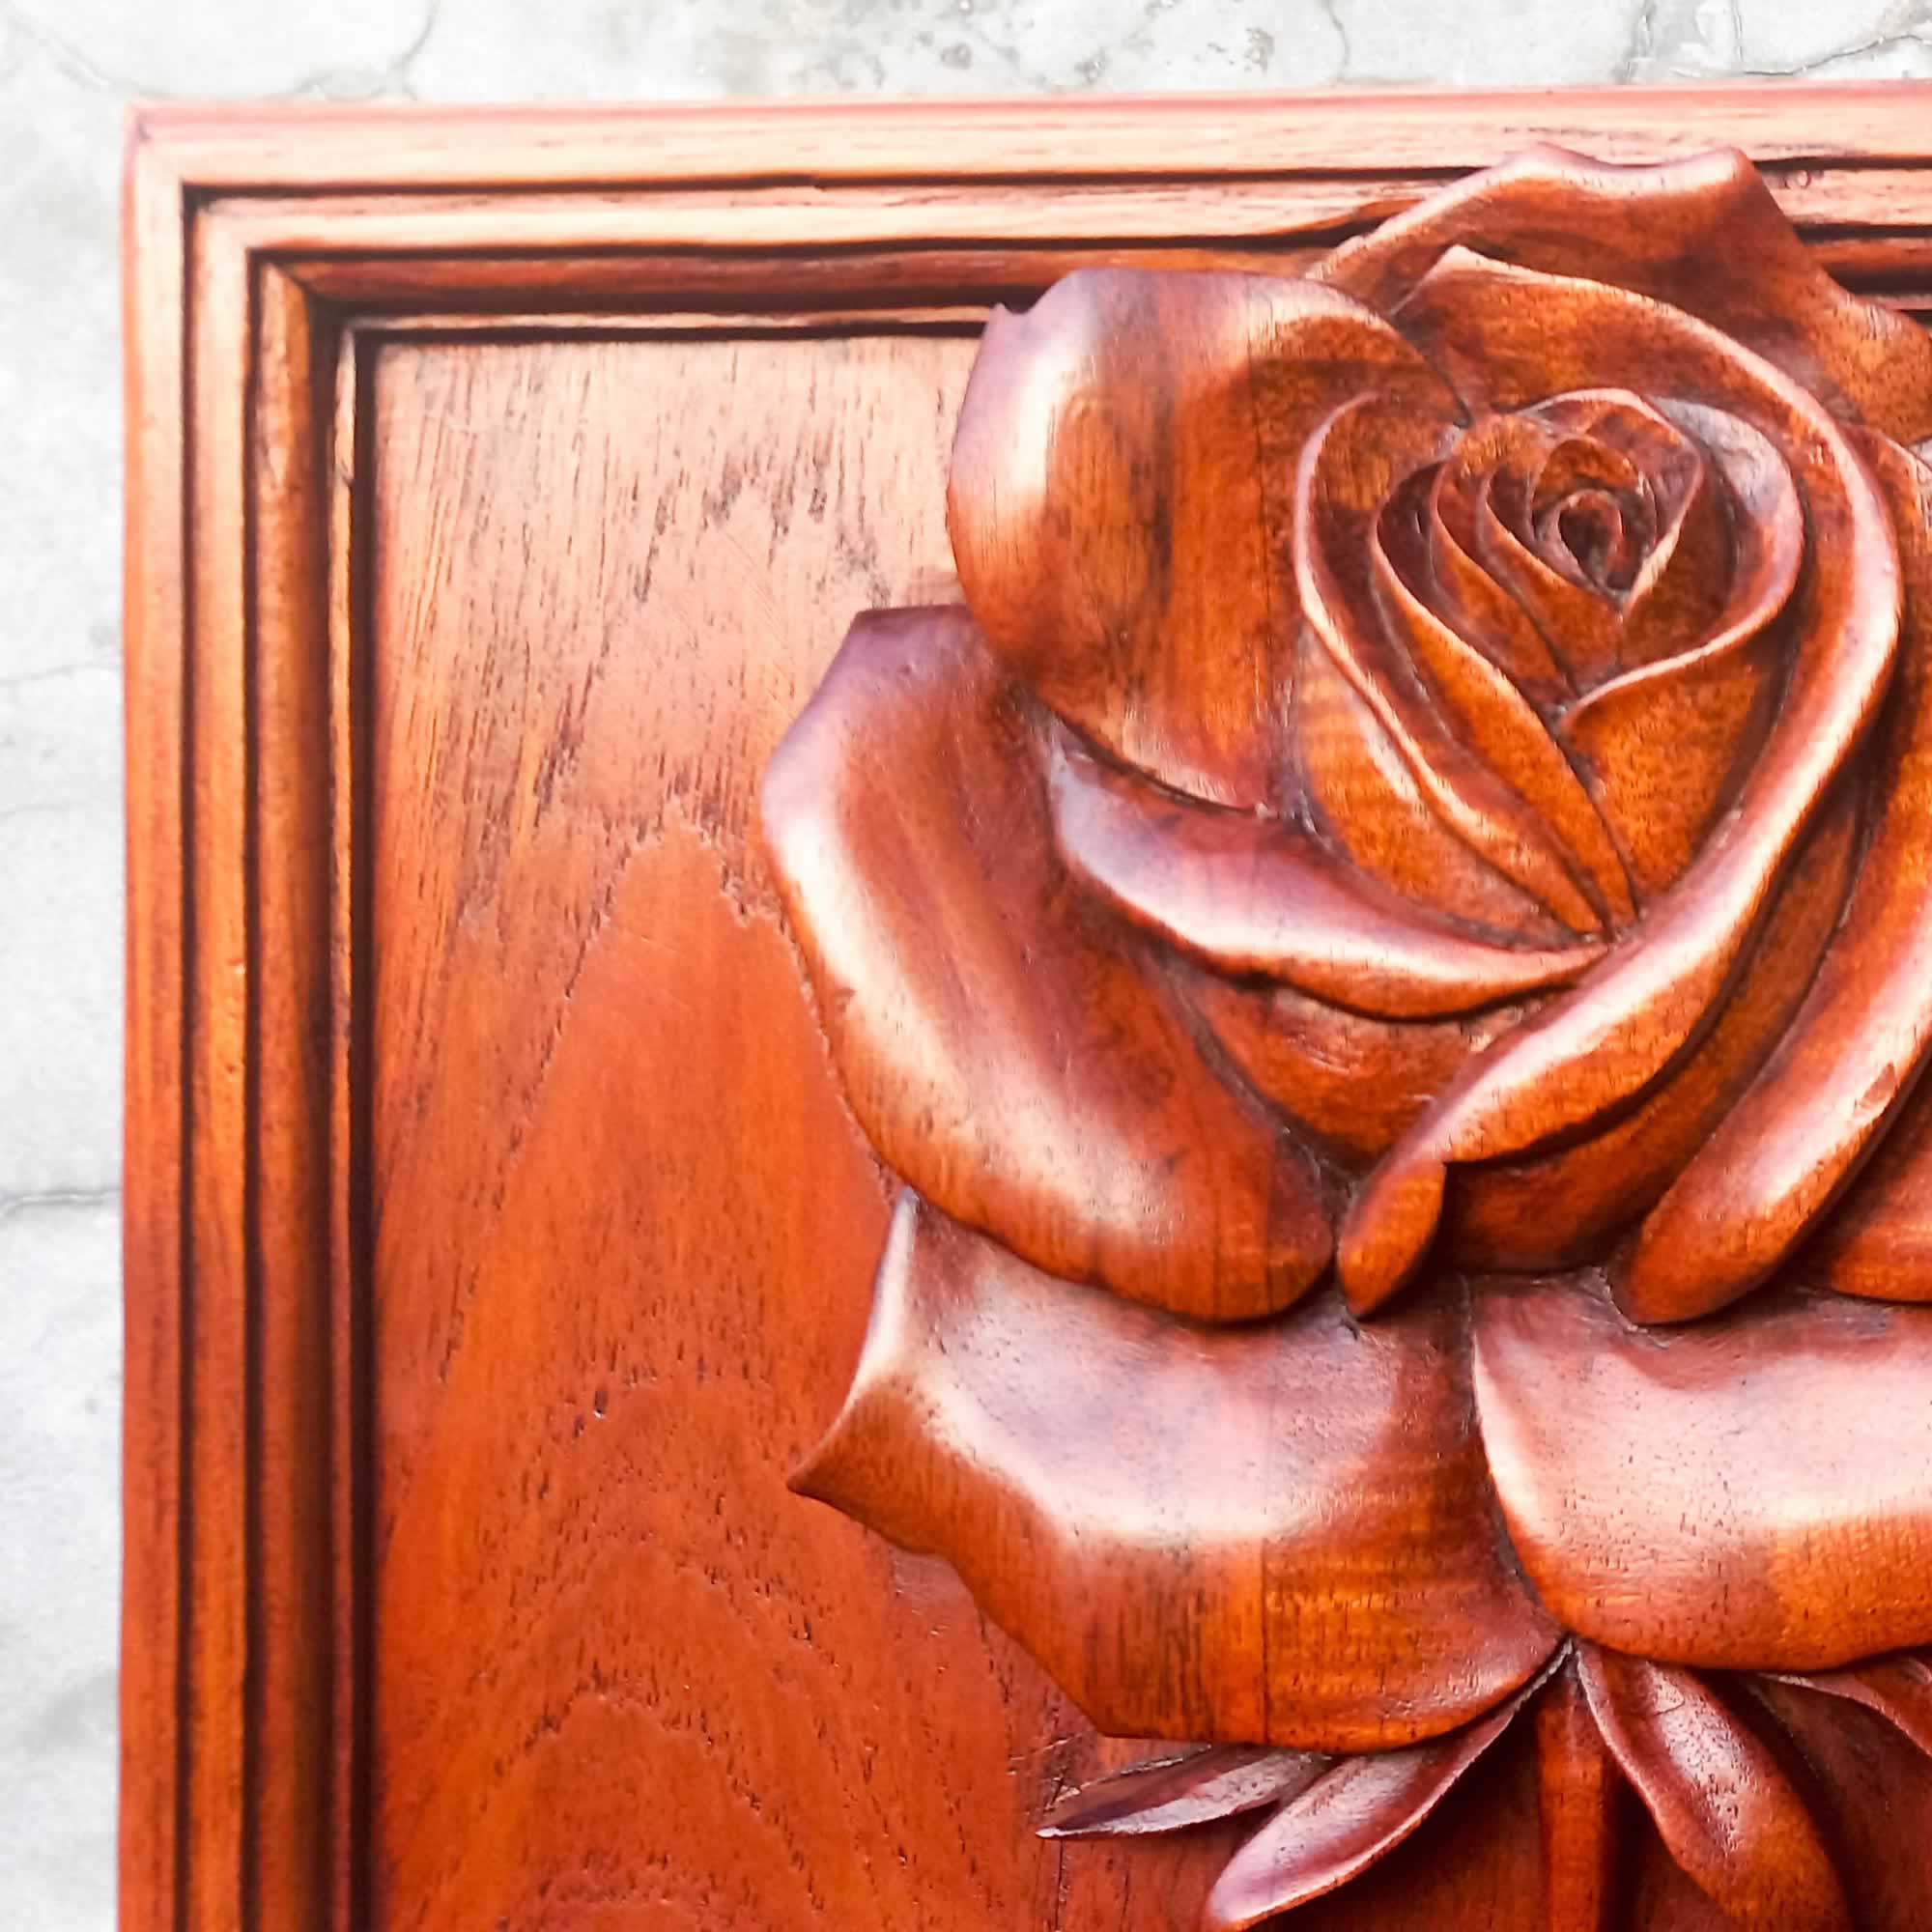 Love Rose Hand Carved Wooden Wall Art Sculpture Decoration Nature Garden - Perfect Valentine Christmas Gift. easternada.com